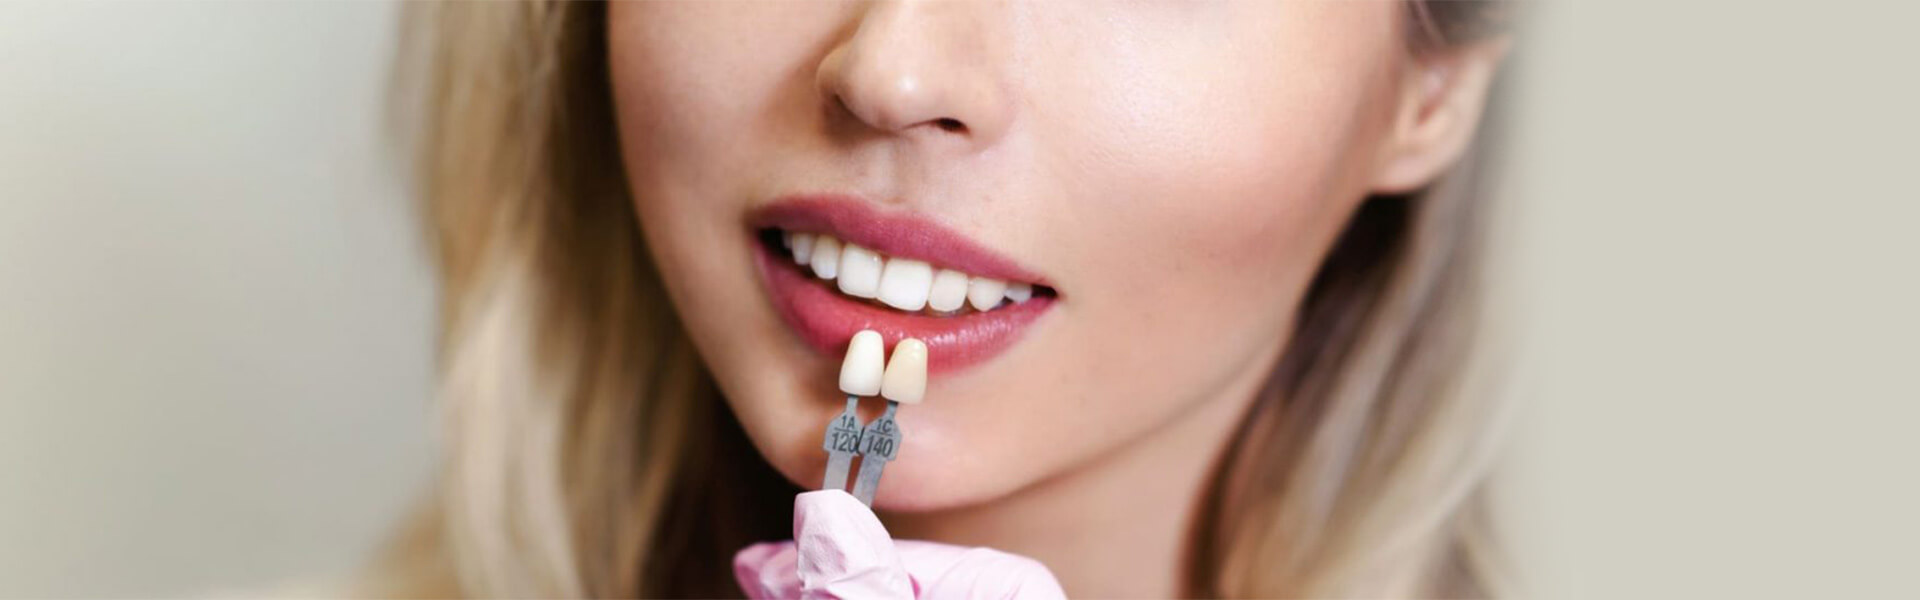 Useful Information about Veneers that You Should Know